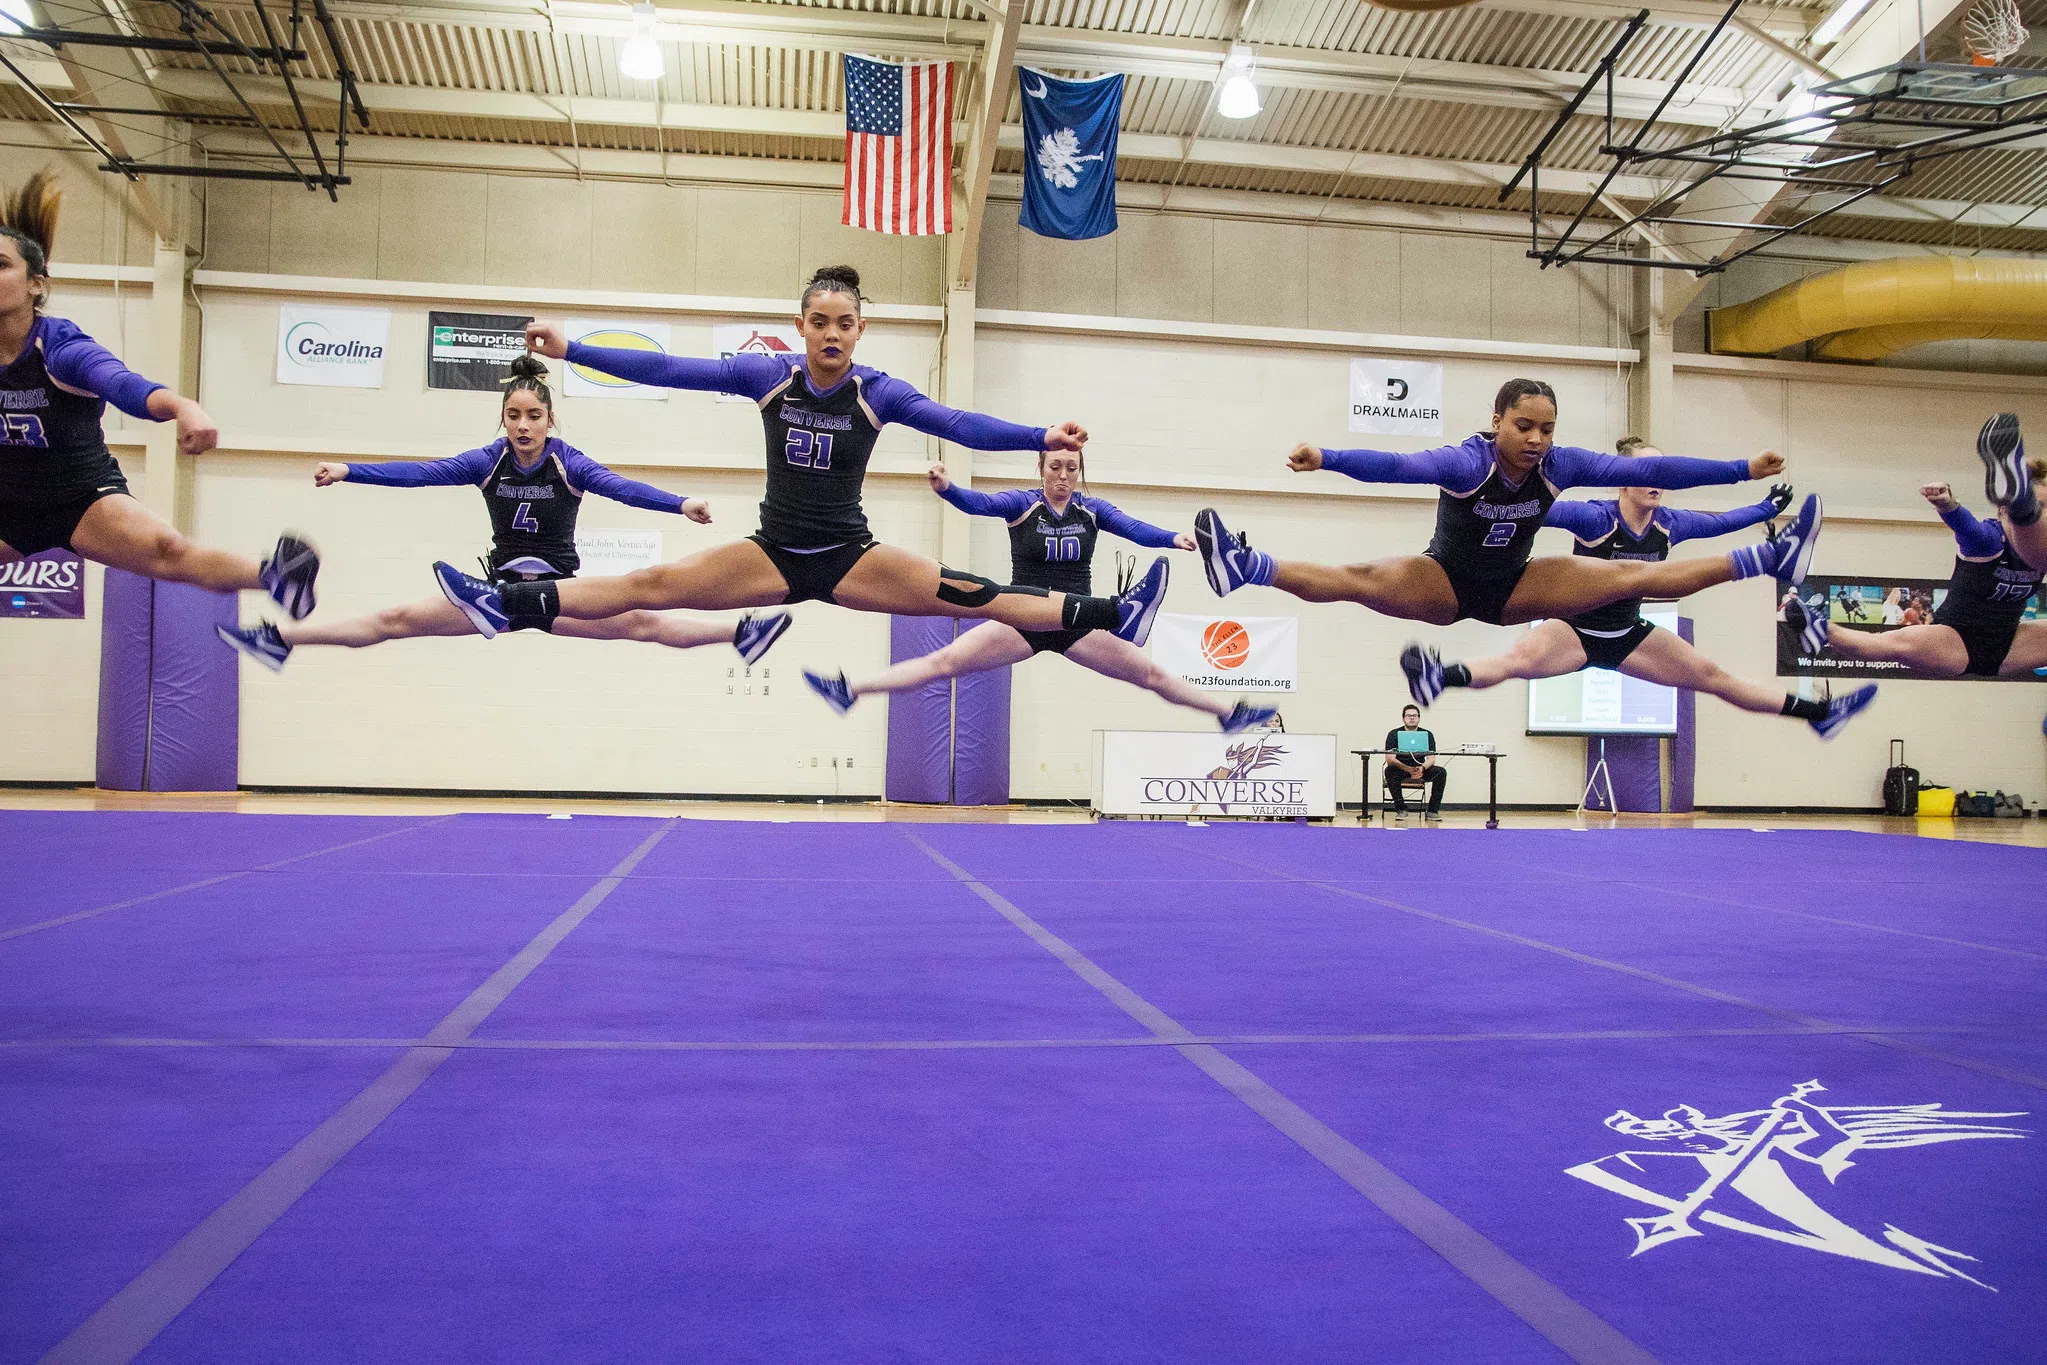 Athletes from the Acrobatic and Tumbling team perform straddle jumps on a purple gym mat.